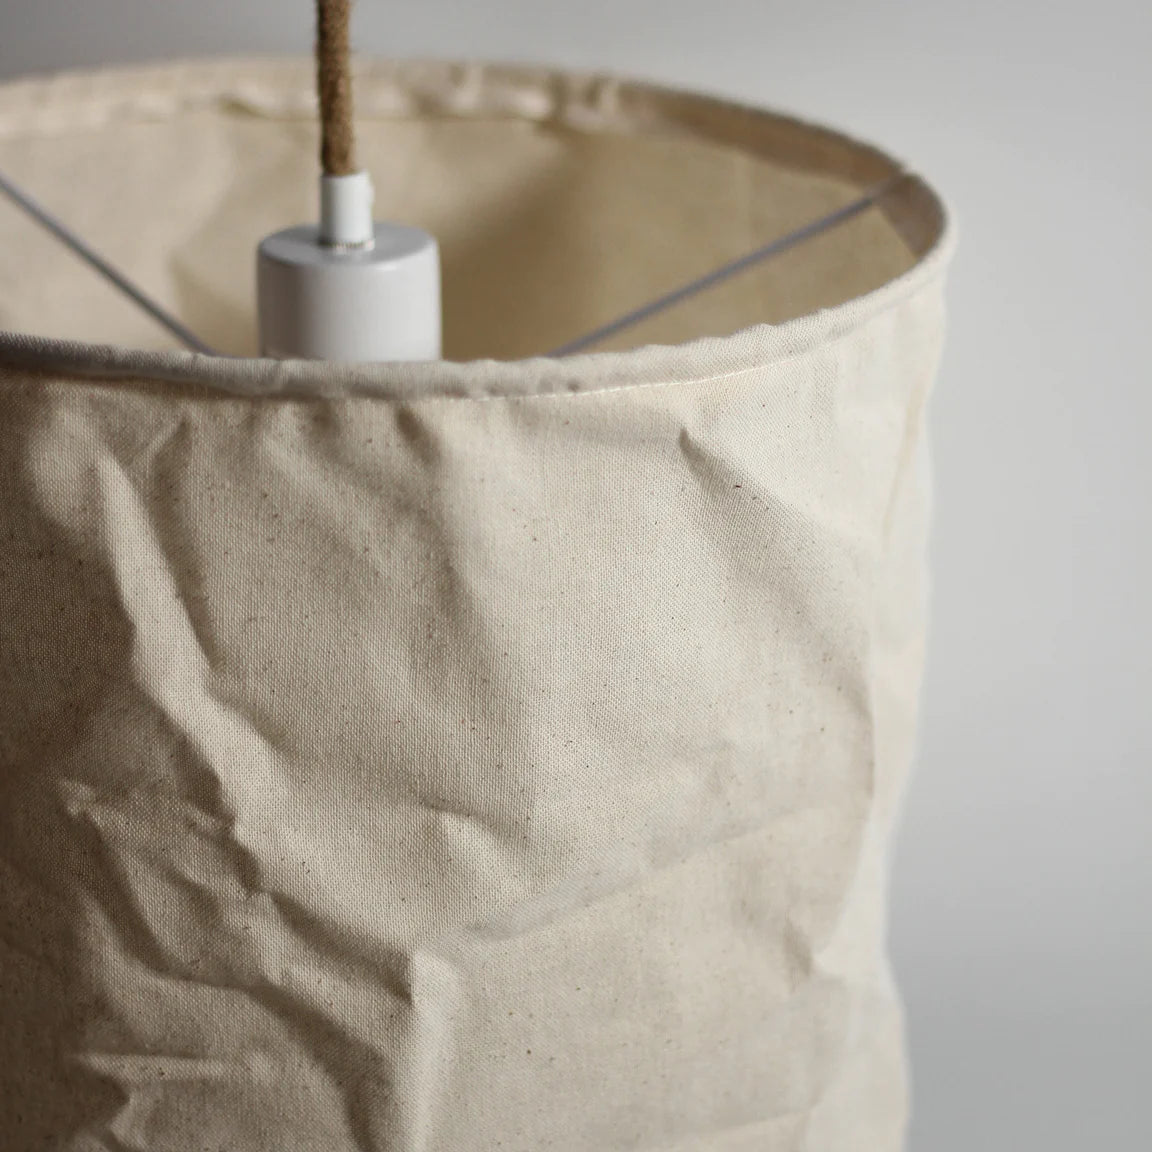 Natural Linen Pendant Light - Small or Large